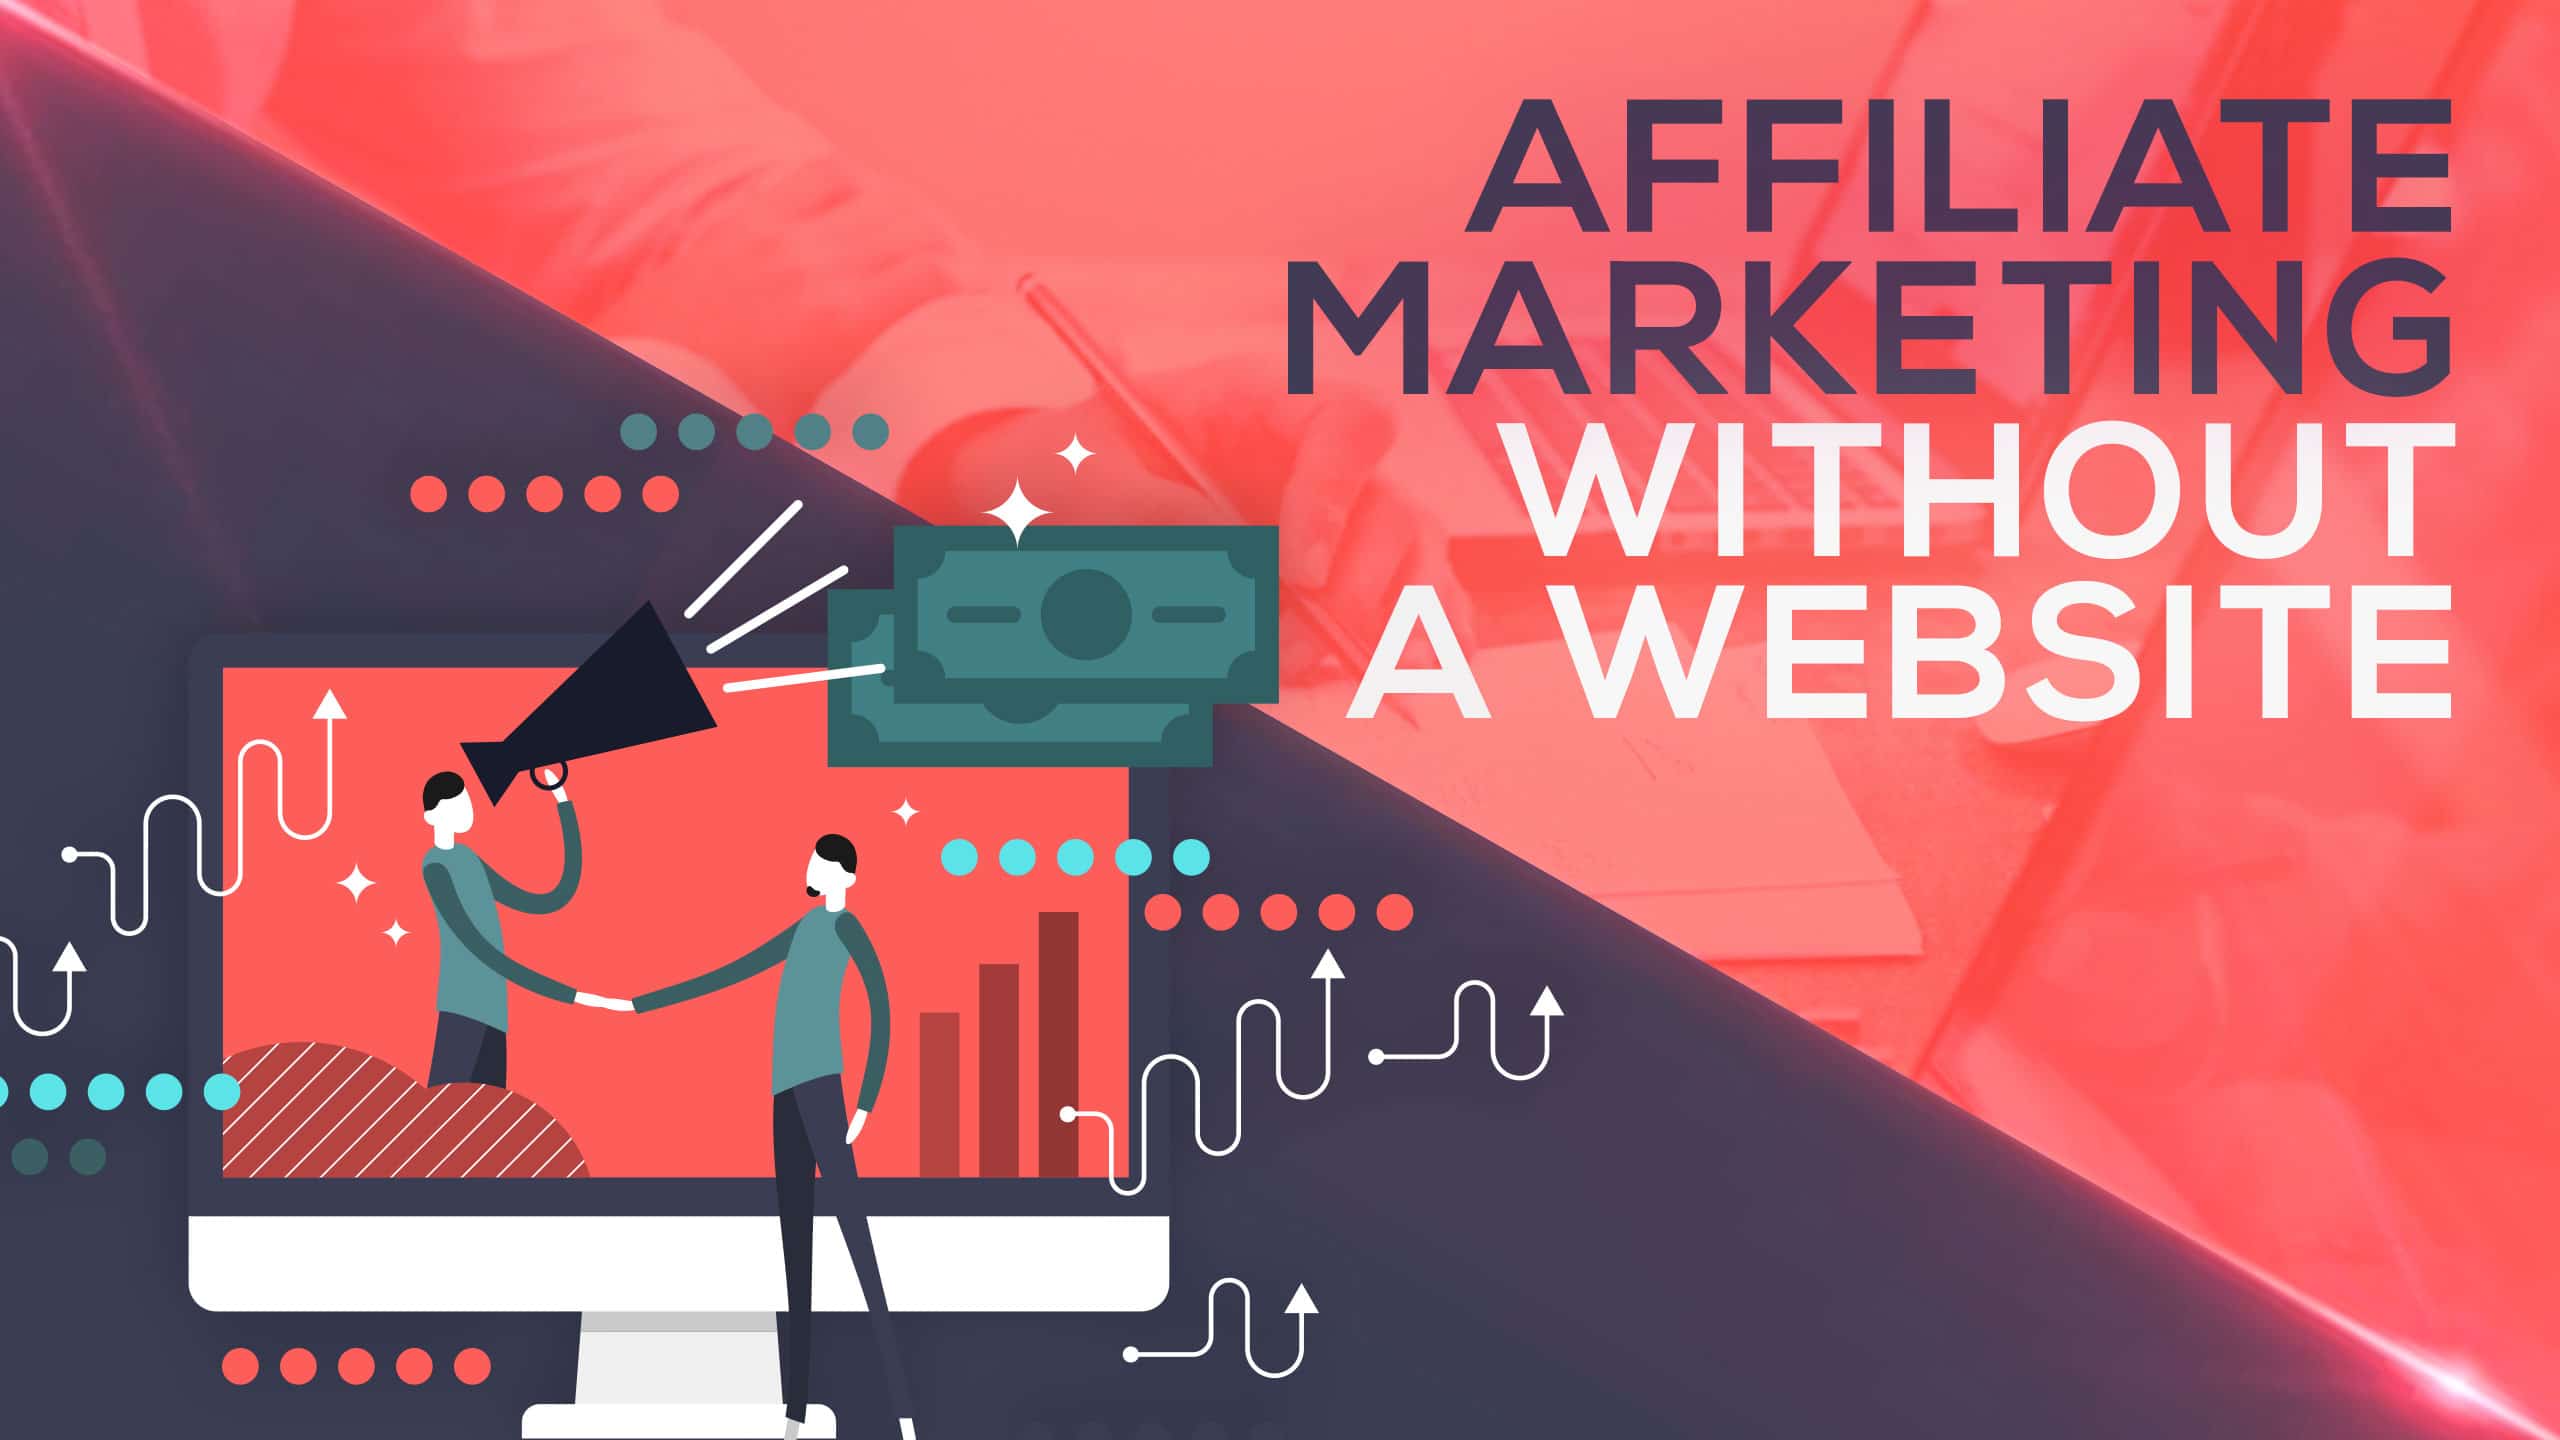 How to do Affiliate Marketing Without a Website Jon Torres